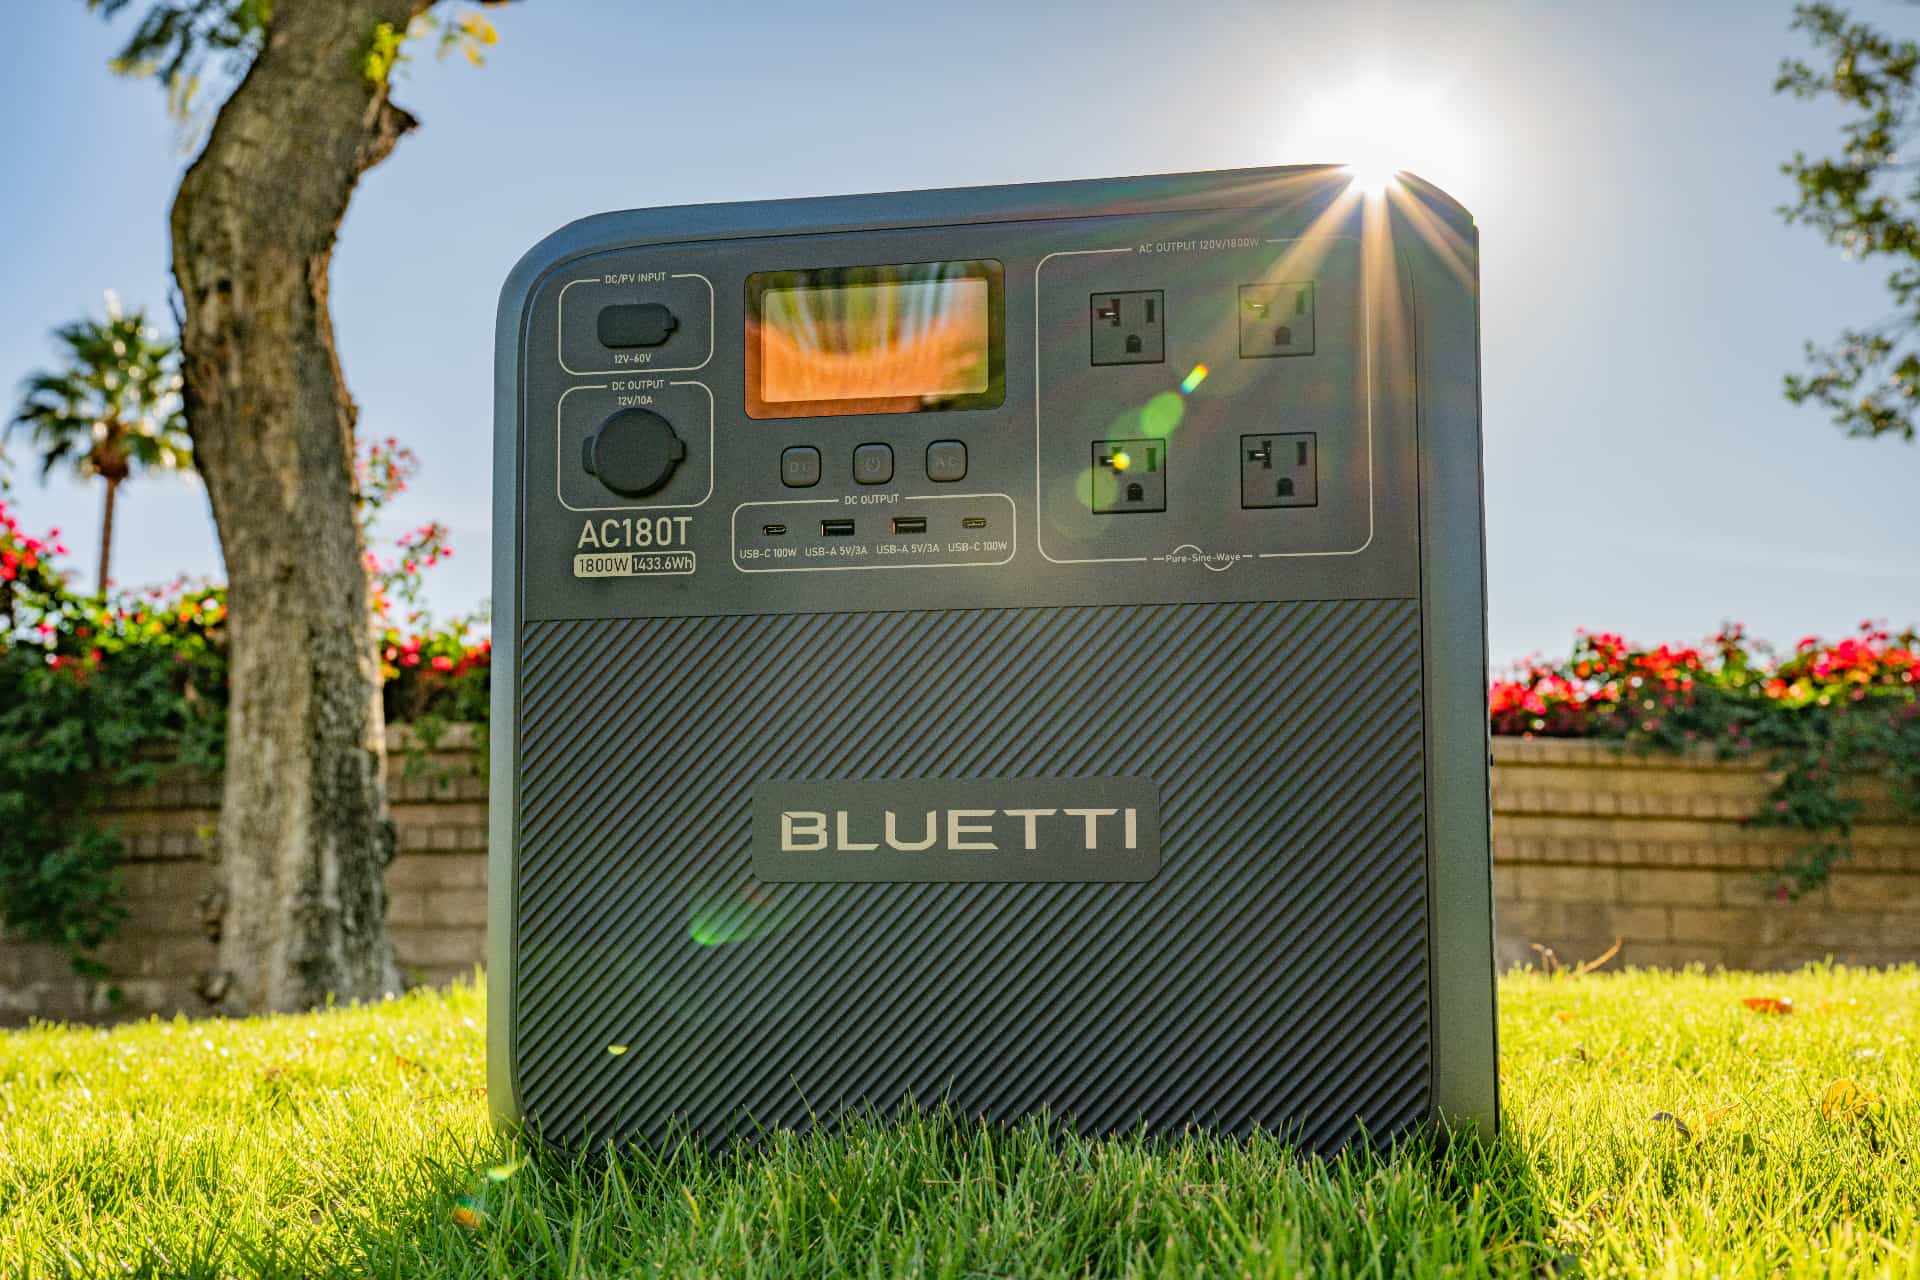 Bluetti's AC180T portable power station on the grass under direct sunlight, showcasing its outlets and ports